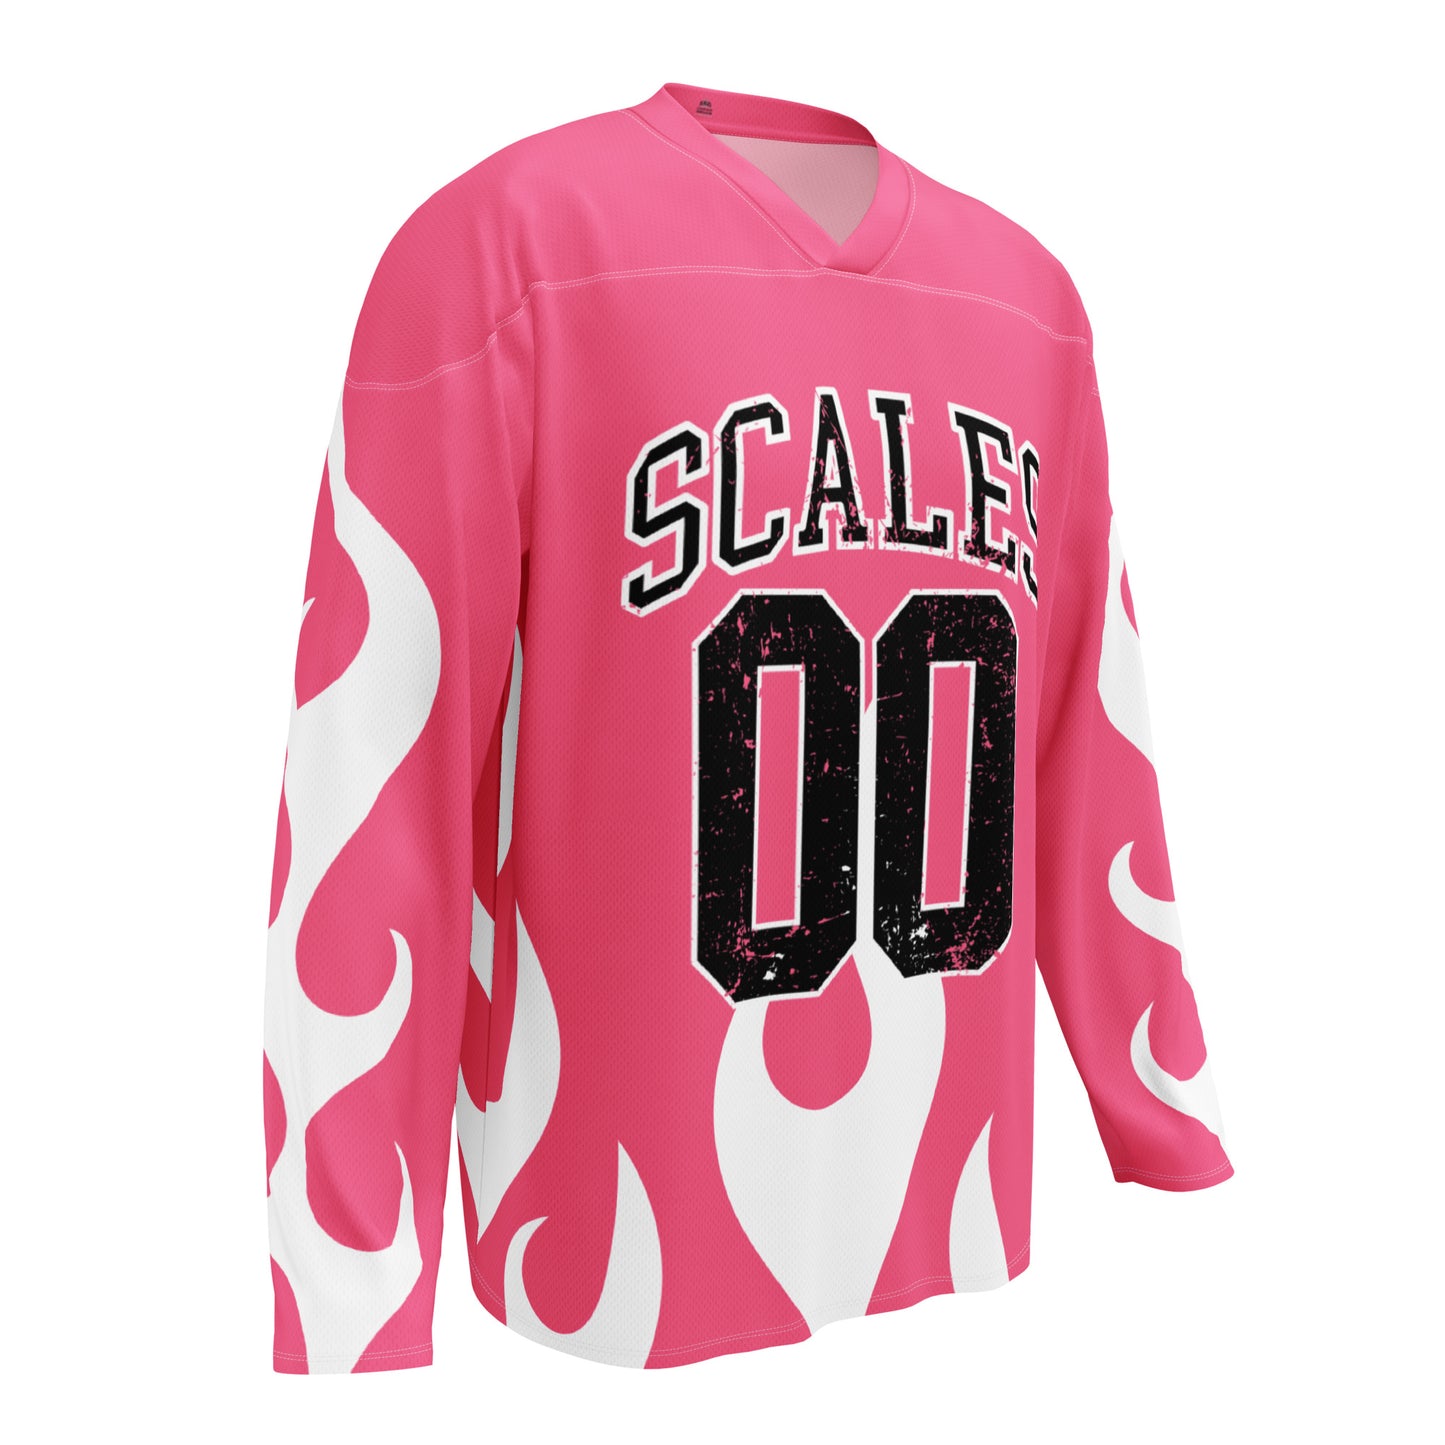 Pink Scales jersey